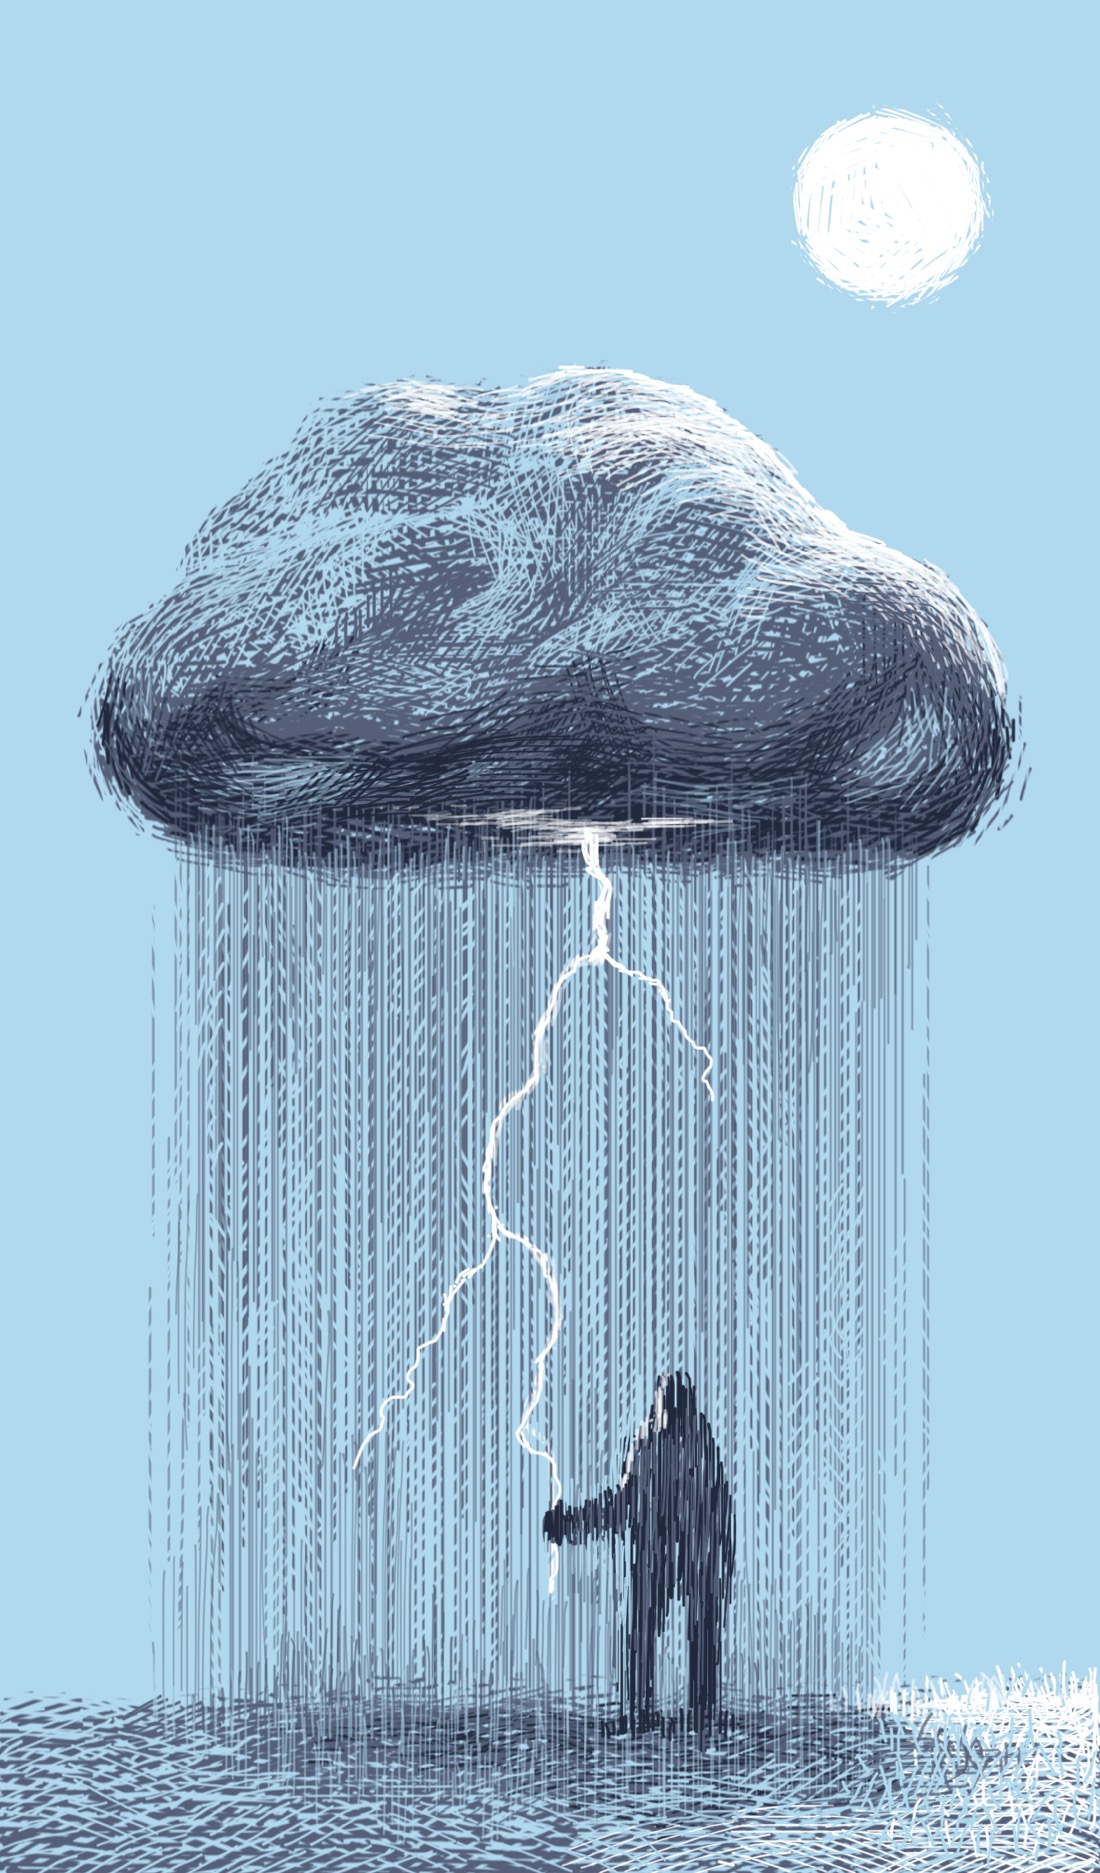 A small, extremely localized thunderstorm unleashes a downpour and lightning bolt in one specific spot. The entire storm is maybe not more than 12 feet in diameter. Other than the storm, the sky is completely blue; above, the sun shines. Standing directly under the cloud is a person, grasping the thin, jagged lightning bolt as though it's a string attached to a balloon.